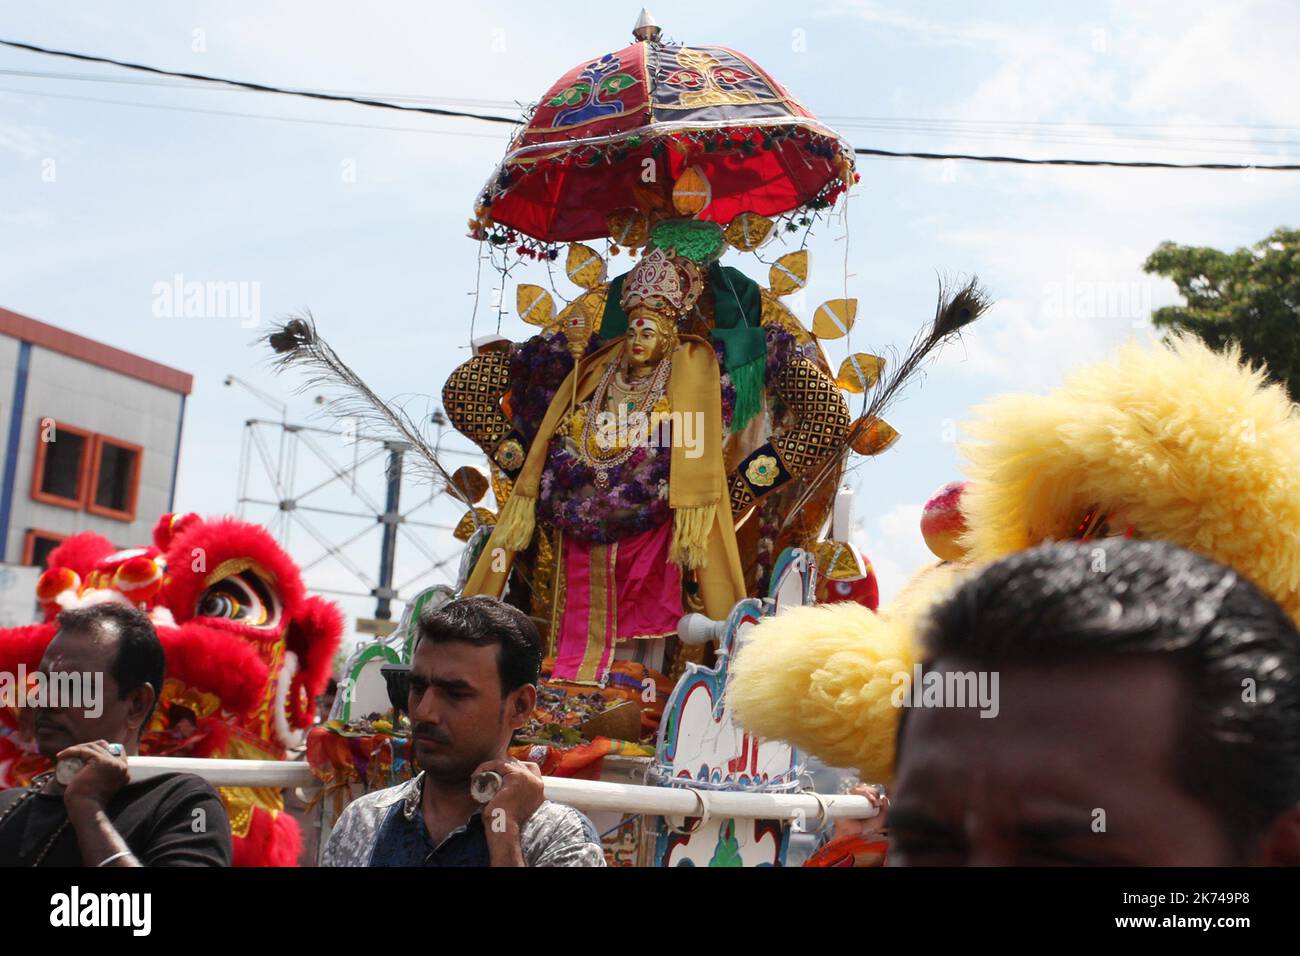 Banda Aceh, Indonesia - April 16.2017: Adherents of Hinduism in Banda Aceh, Indonesia celebrated ritual 'Maha Puja Pangguni Uthiram' in Andawa Palani temple, this ritual as to pray to 'God Murugan,' thanked and make vows and pray that mankind may live in peace and prosperity.  Stock Photo